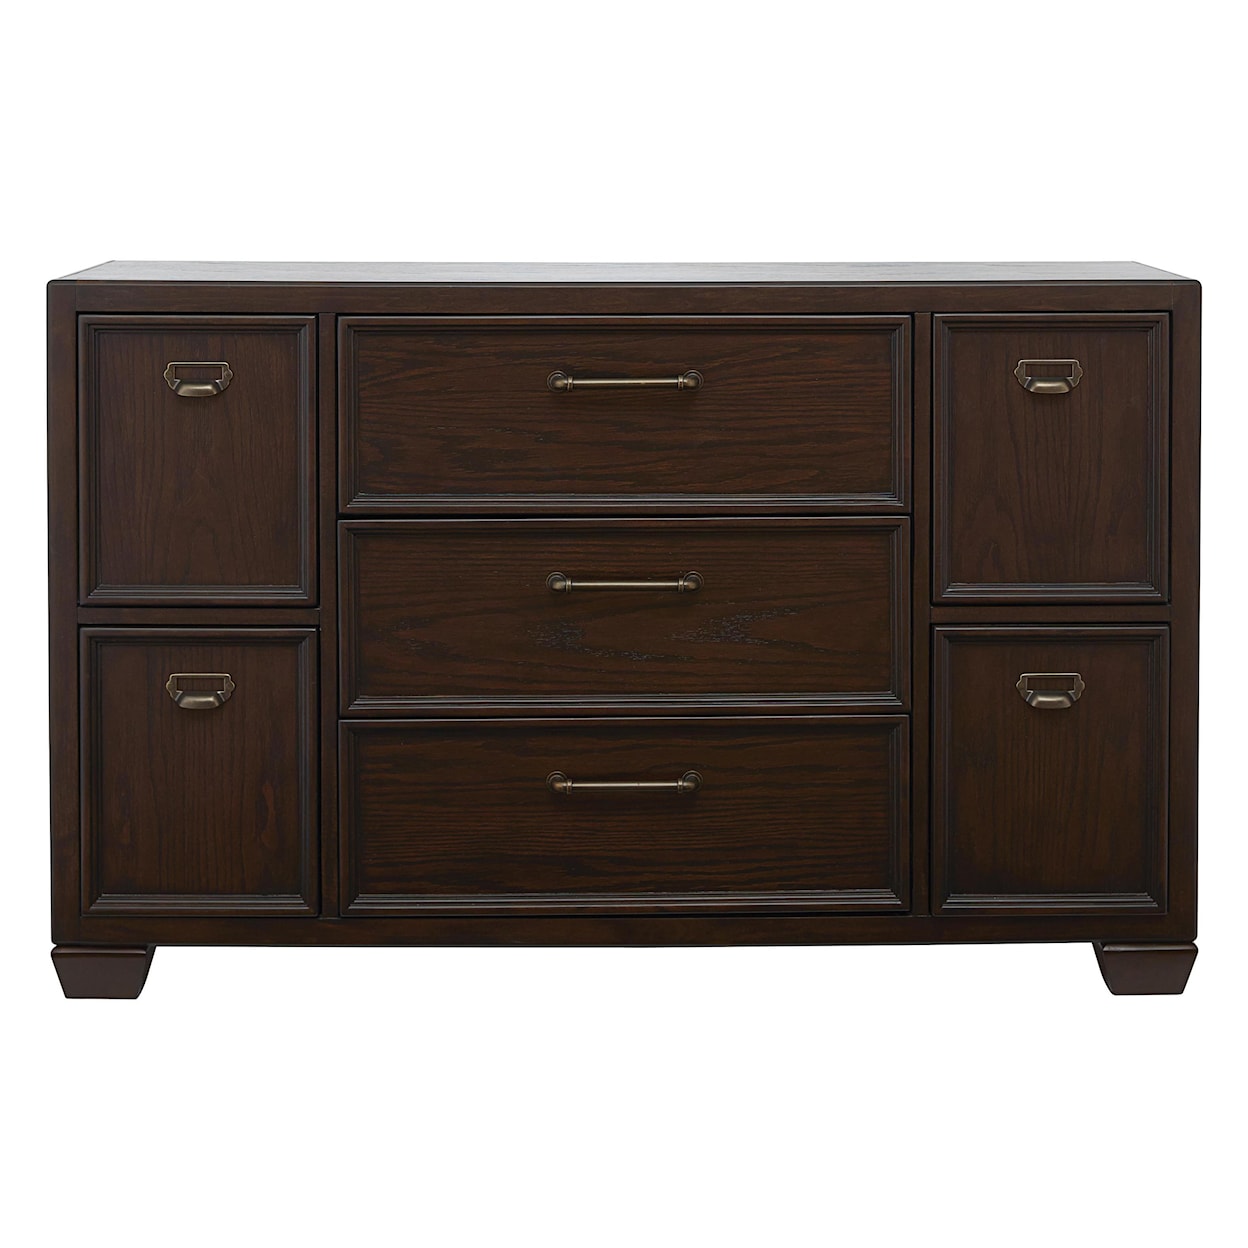 Samuel Lawrence Clubhouse Drawer Dresser